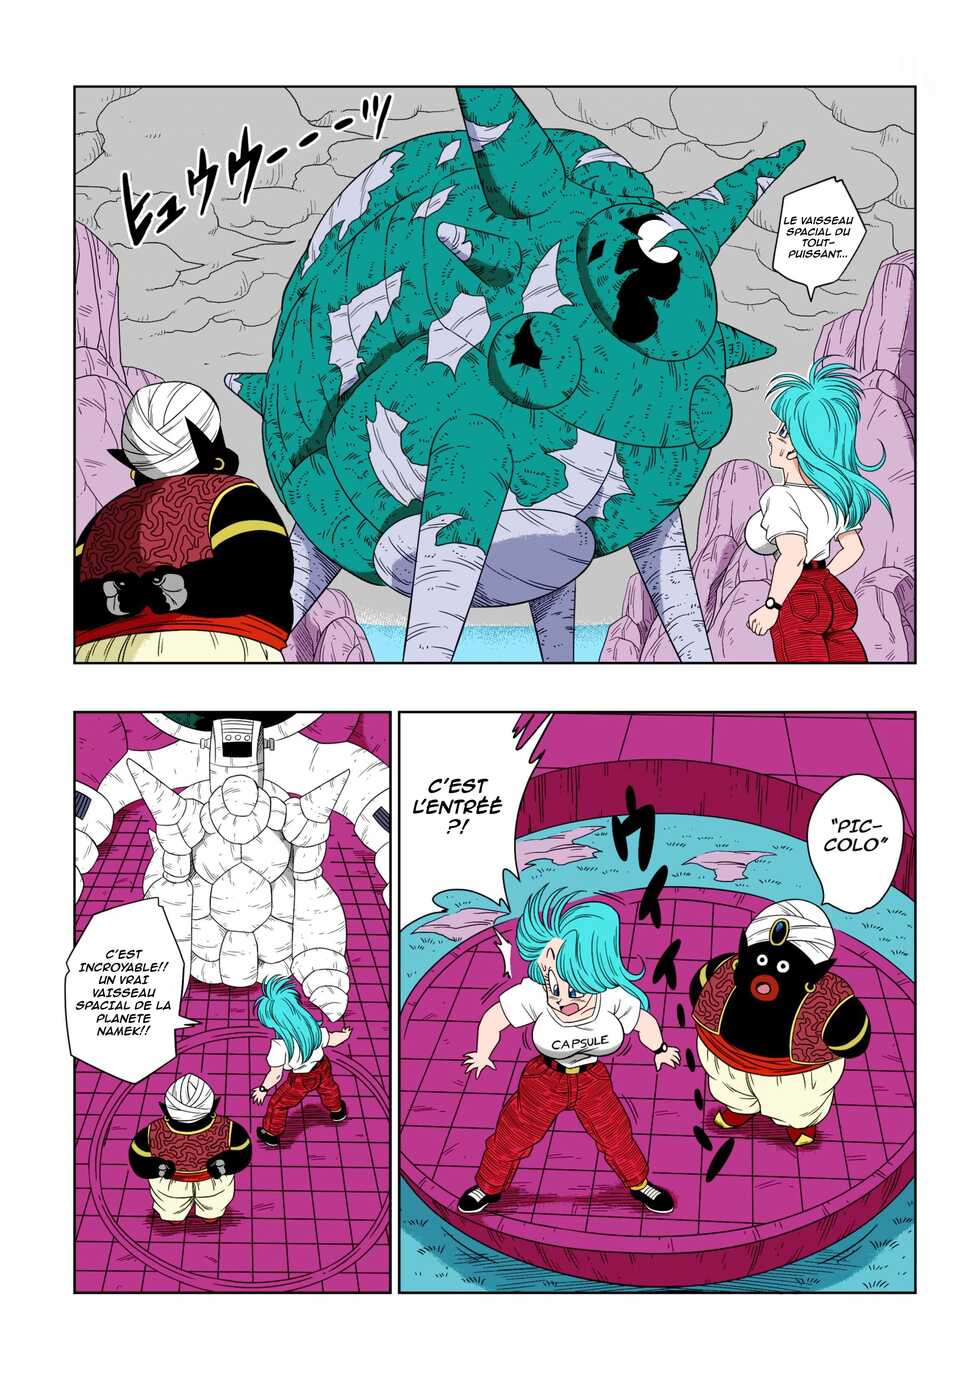 [Yamamoto] Bulma Meets Mr.Popo - Sex inside the Mysterious Spaceship! (Dragon Ball Z) [Uncensored] [FRENCH] [Colorized] - Page 4